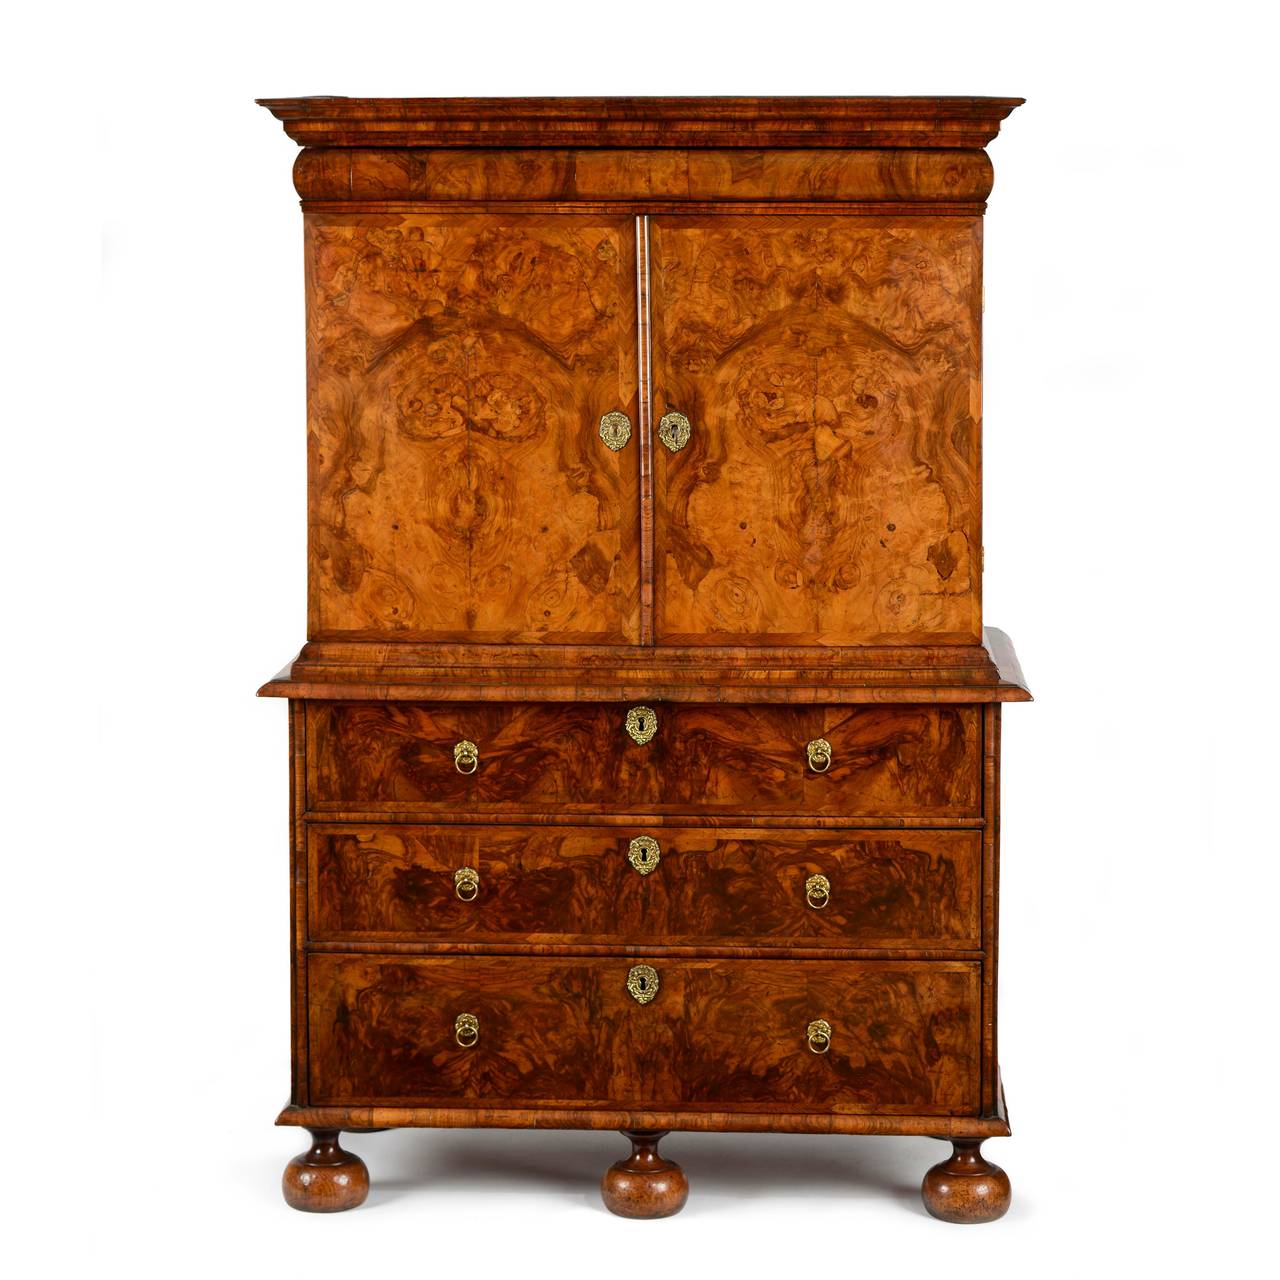 A fine English William & Mary burr and figured walnut cabinet on chest retaining excellent colour and patina throughout. The segmented moulded cornice, over a cushion moulded chart drawer. Below a pair of burr bookmatched veneered doors, with